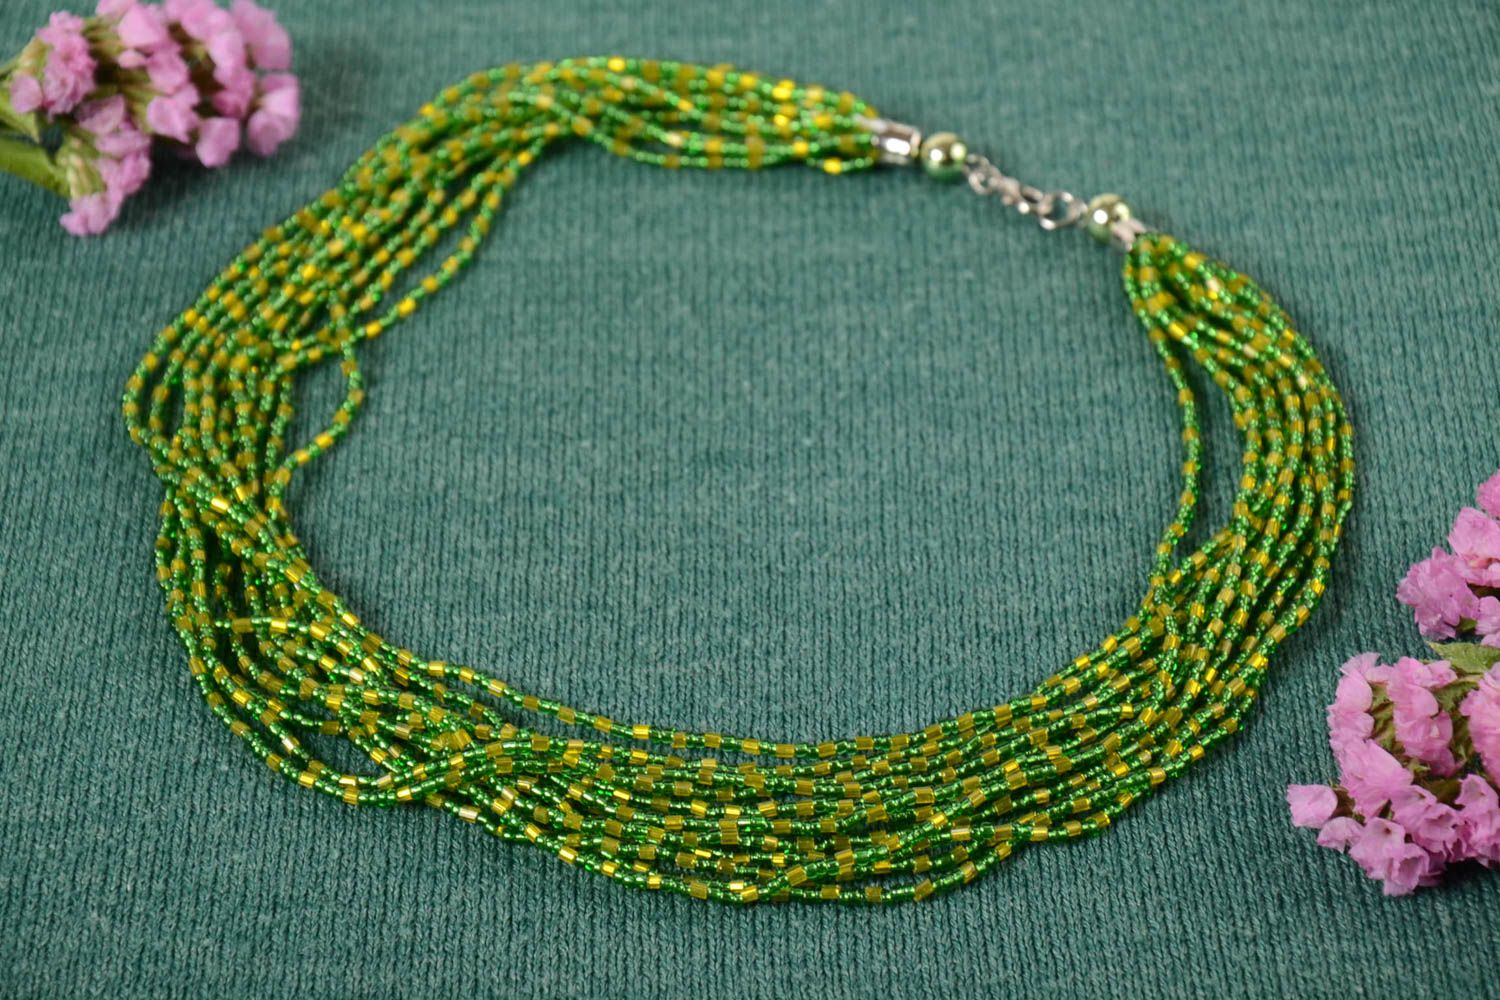 Unusual homemade beaded necklace evening necklace designs fashion accessories photo 1